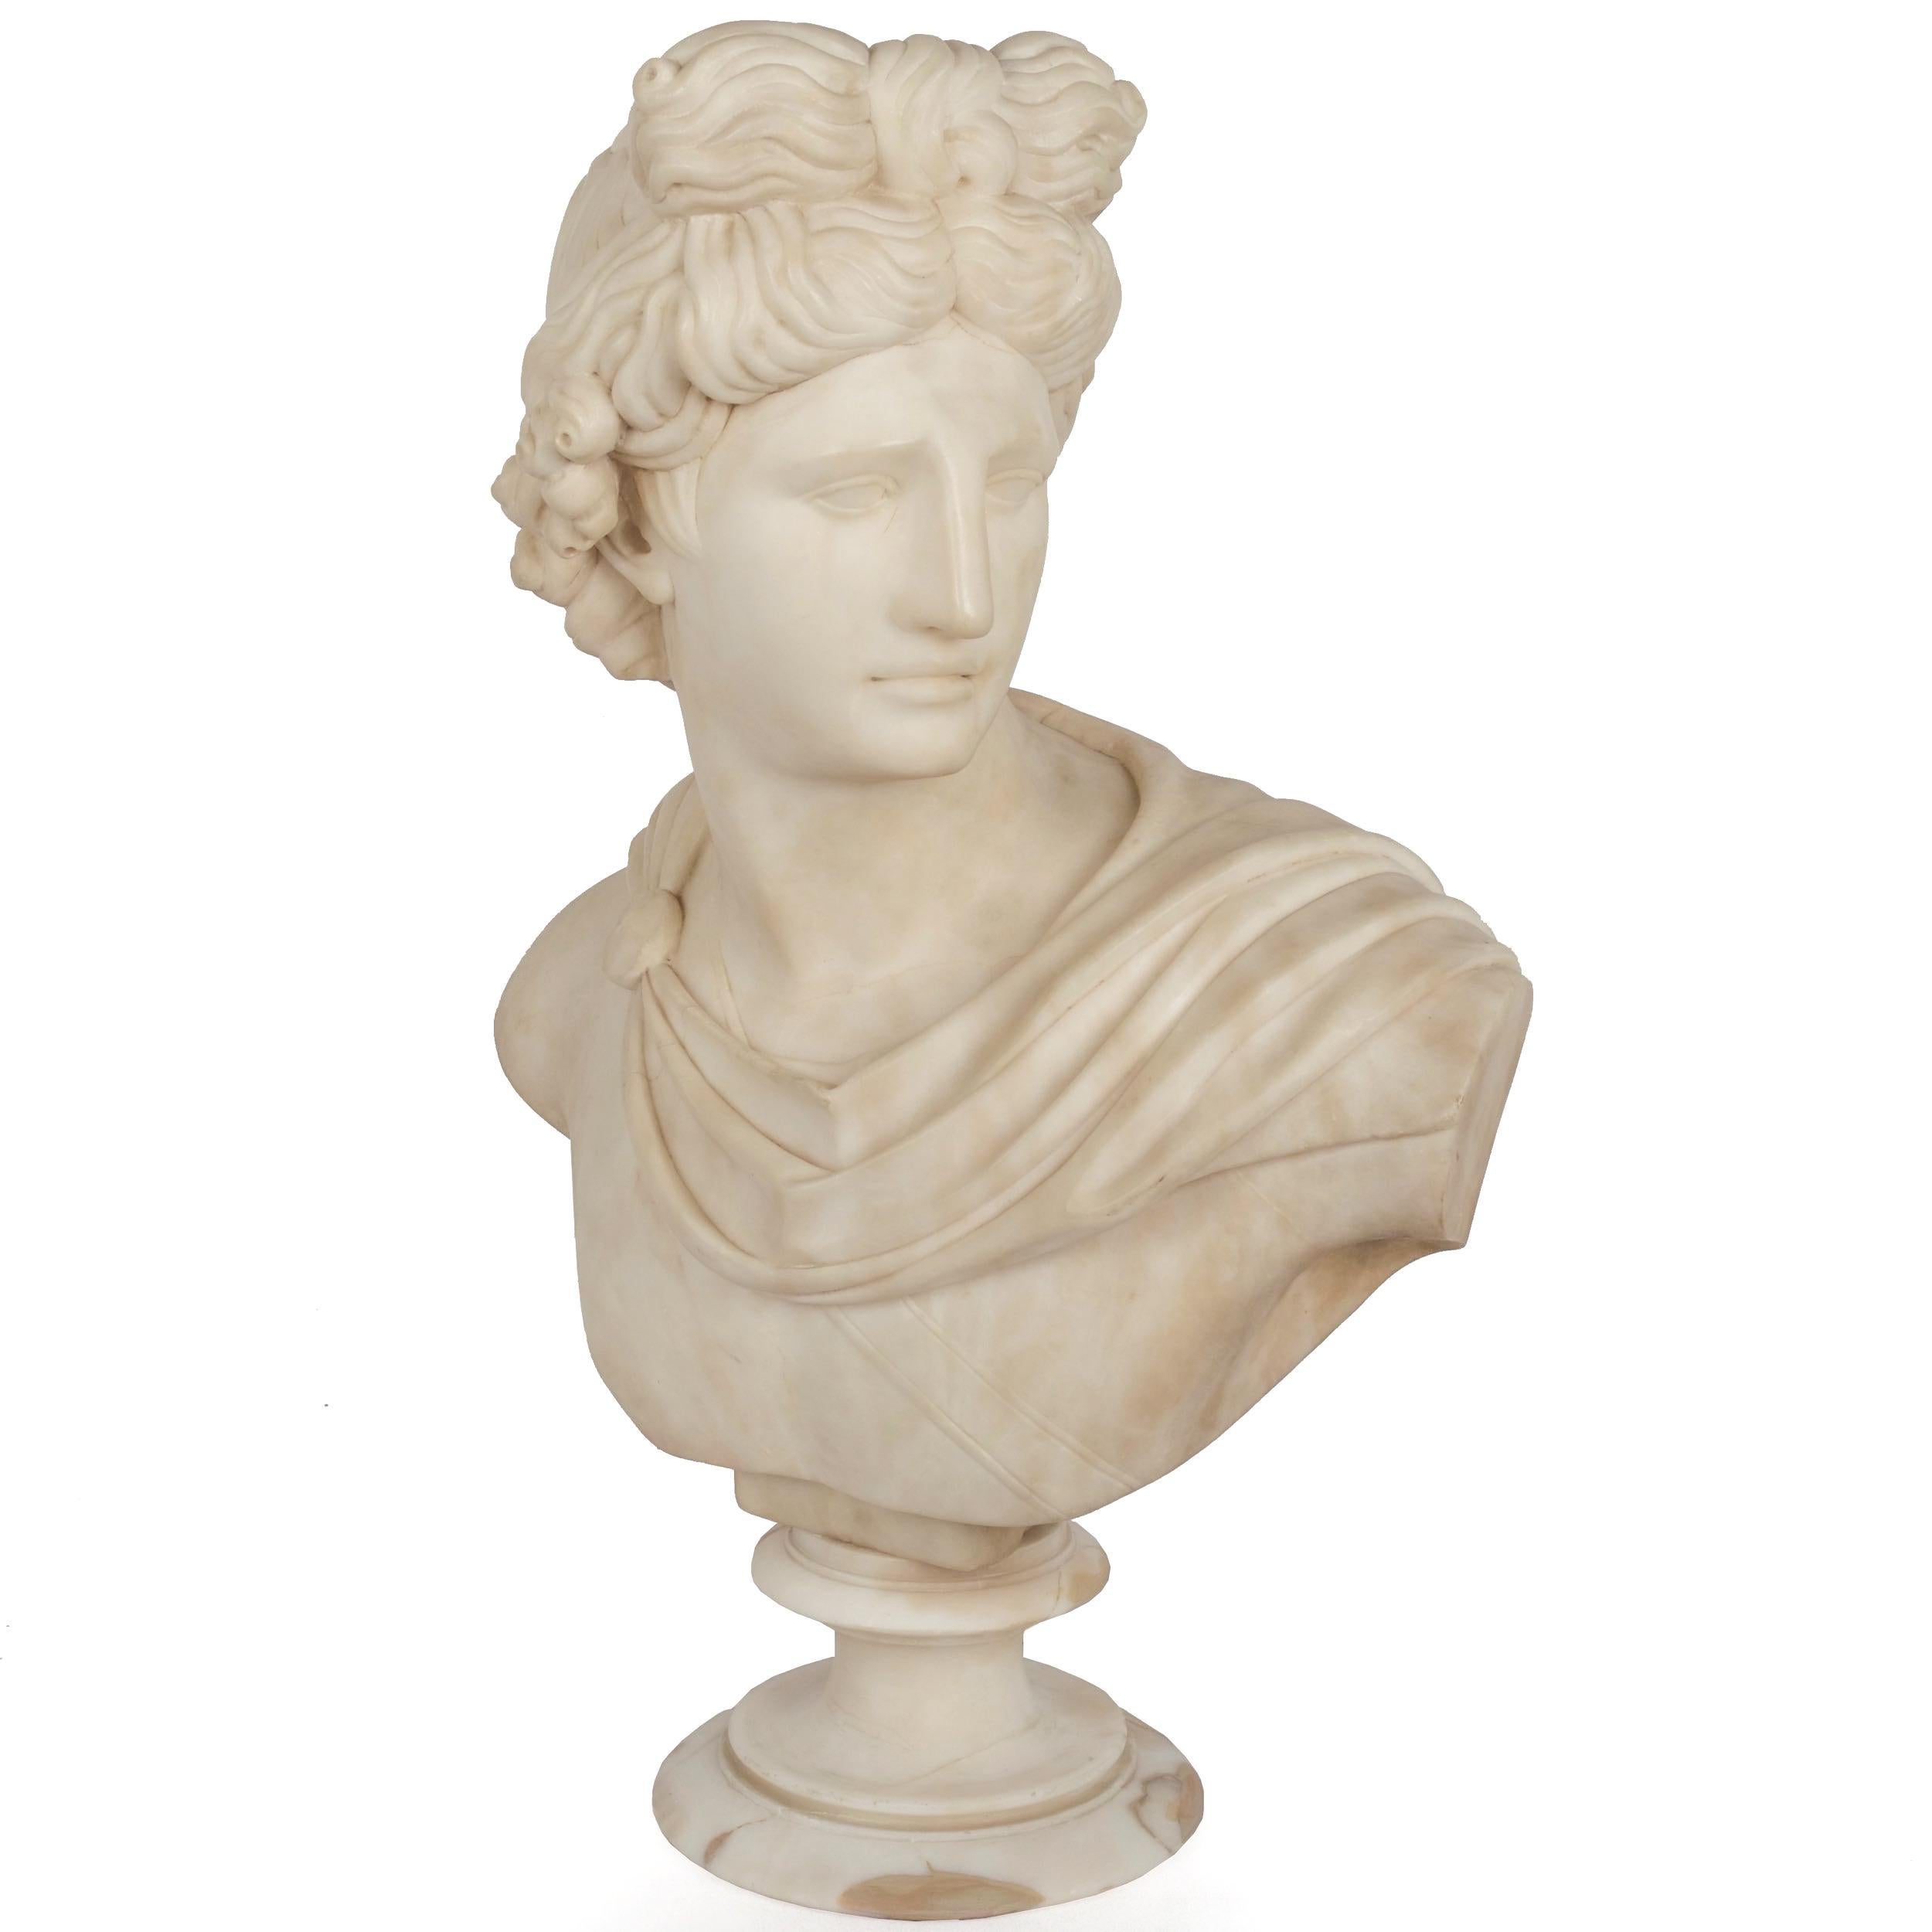 A good late 19th century alabaster bust of Apollo Belvedere after the original held in the Vatican Museum. Likely a product of the Grand Tour movement in Italy, the bust is beautifully proportioned. Details are beautifully retained in the milky